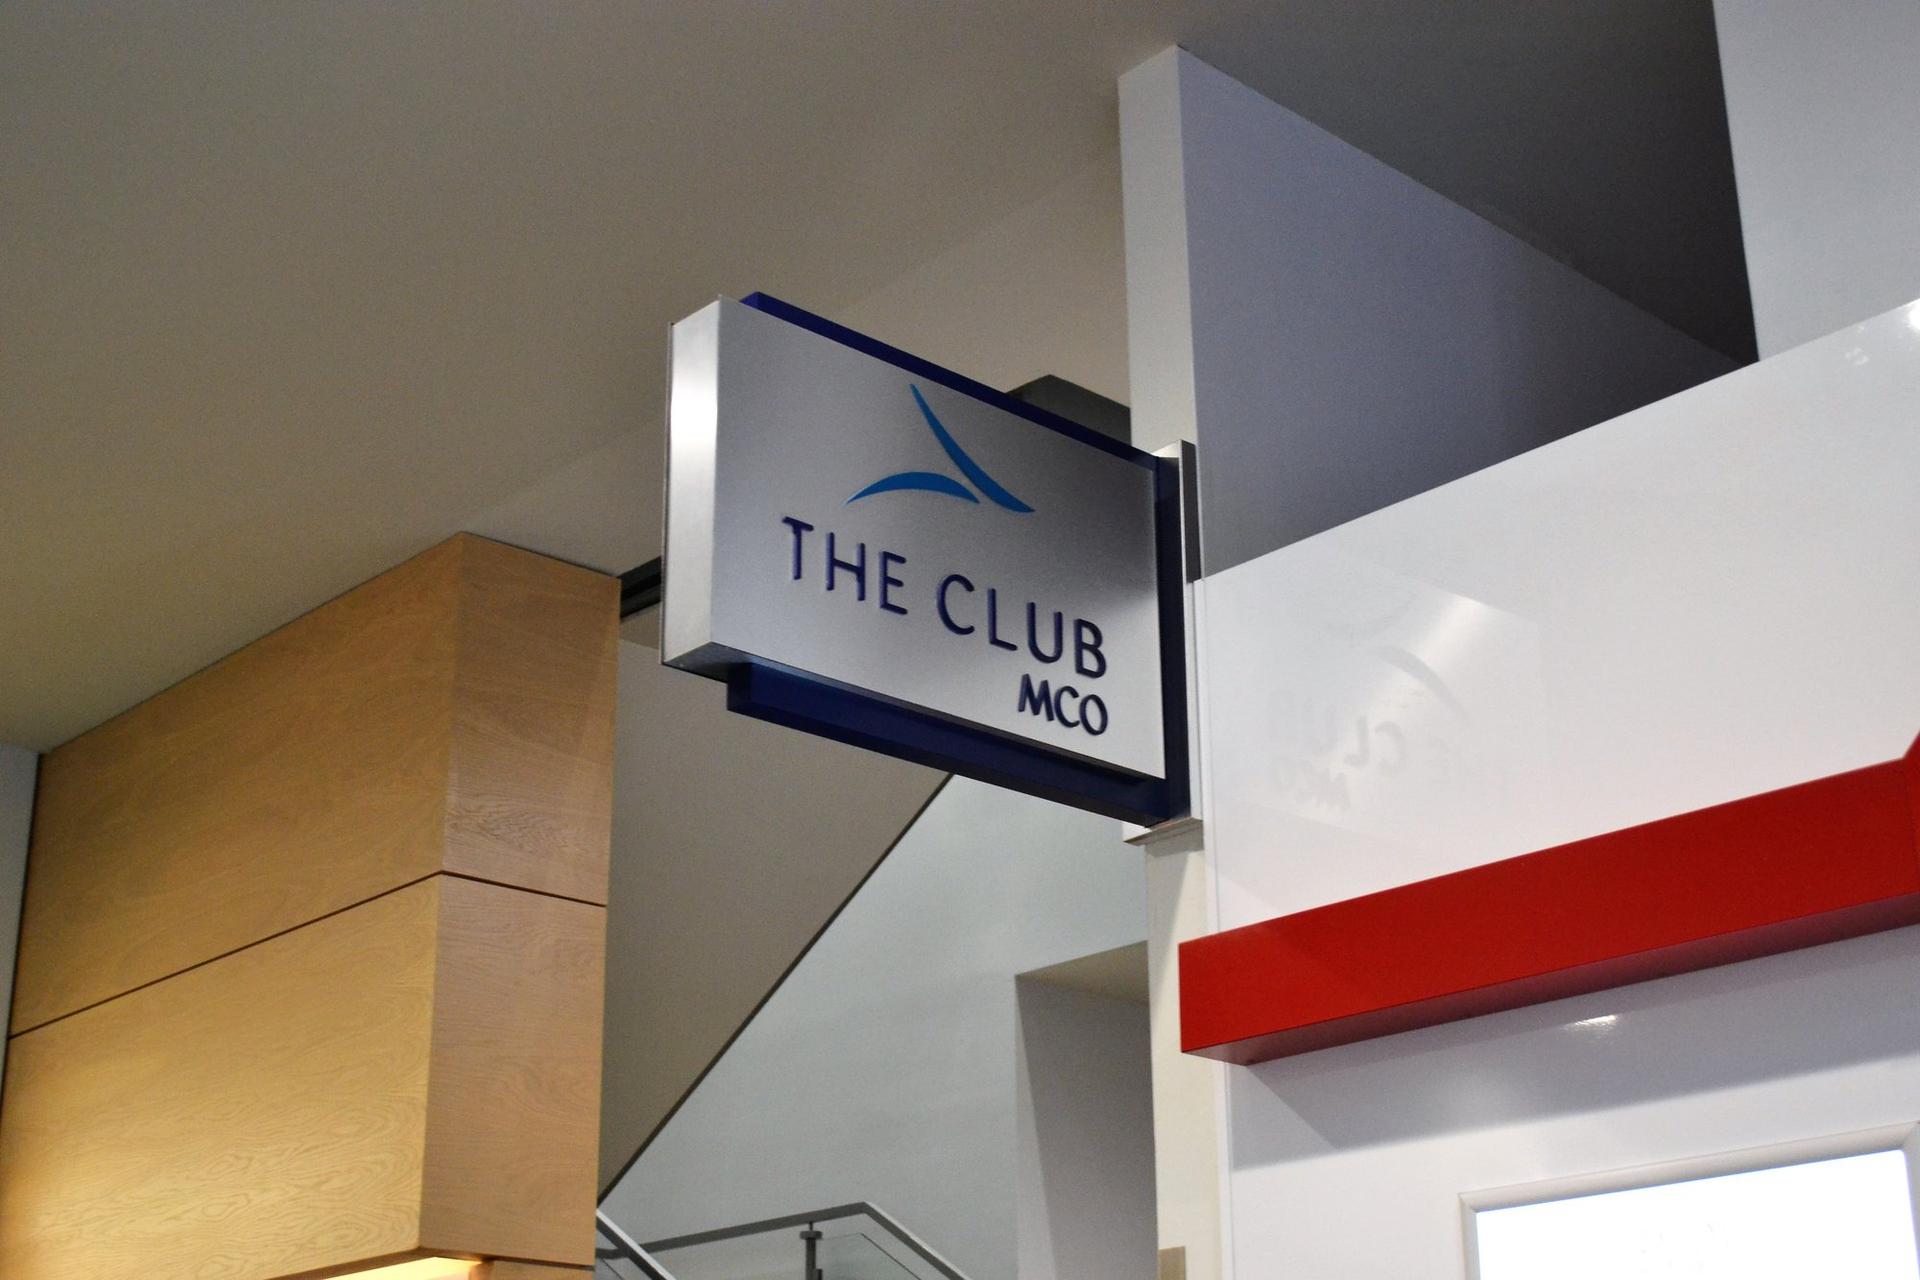 The Club MCO image 41 of 62